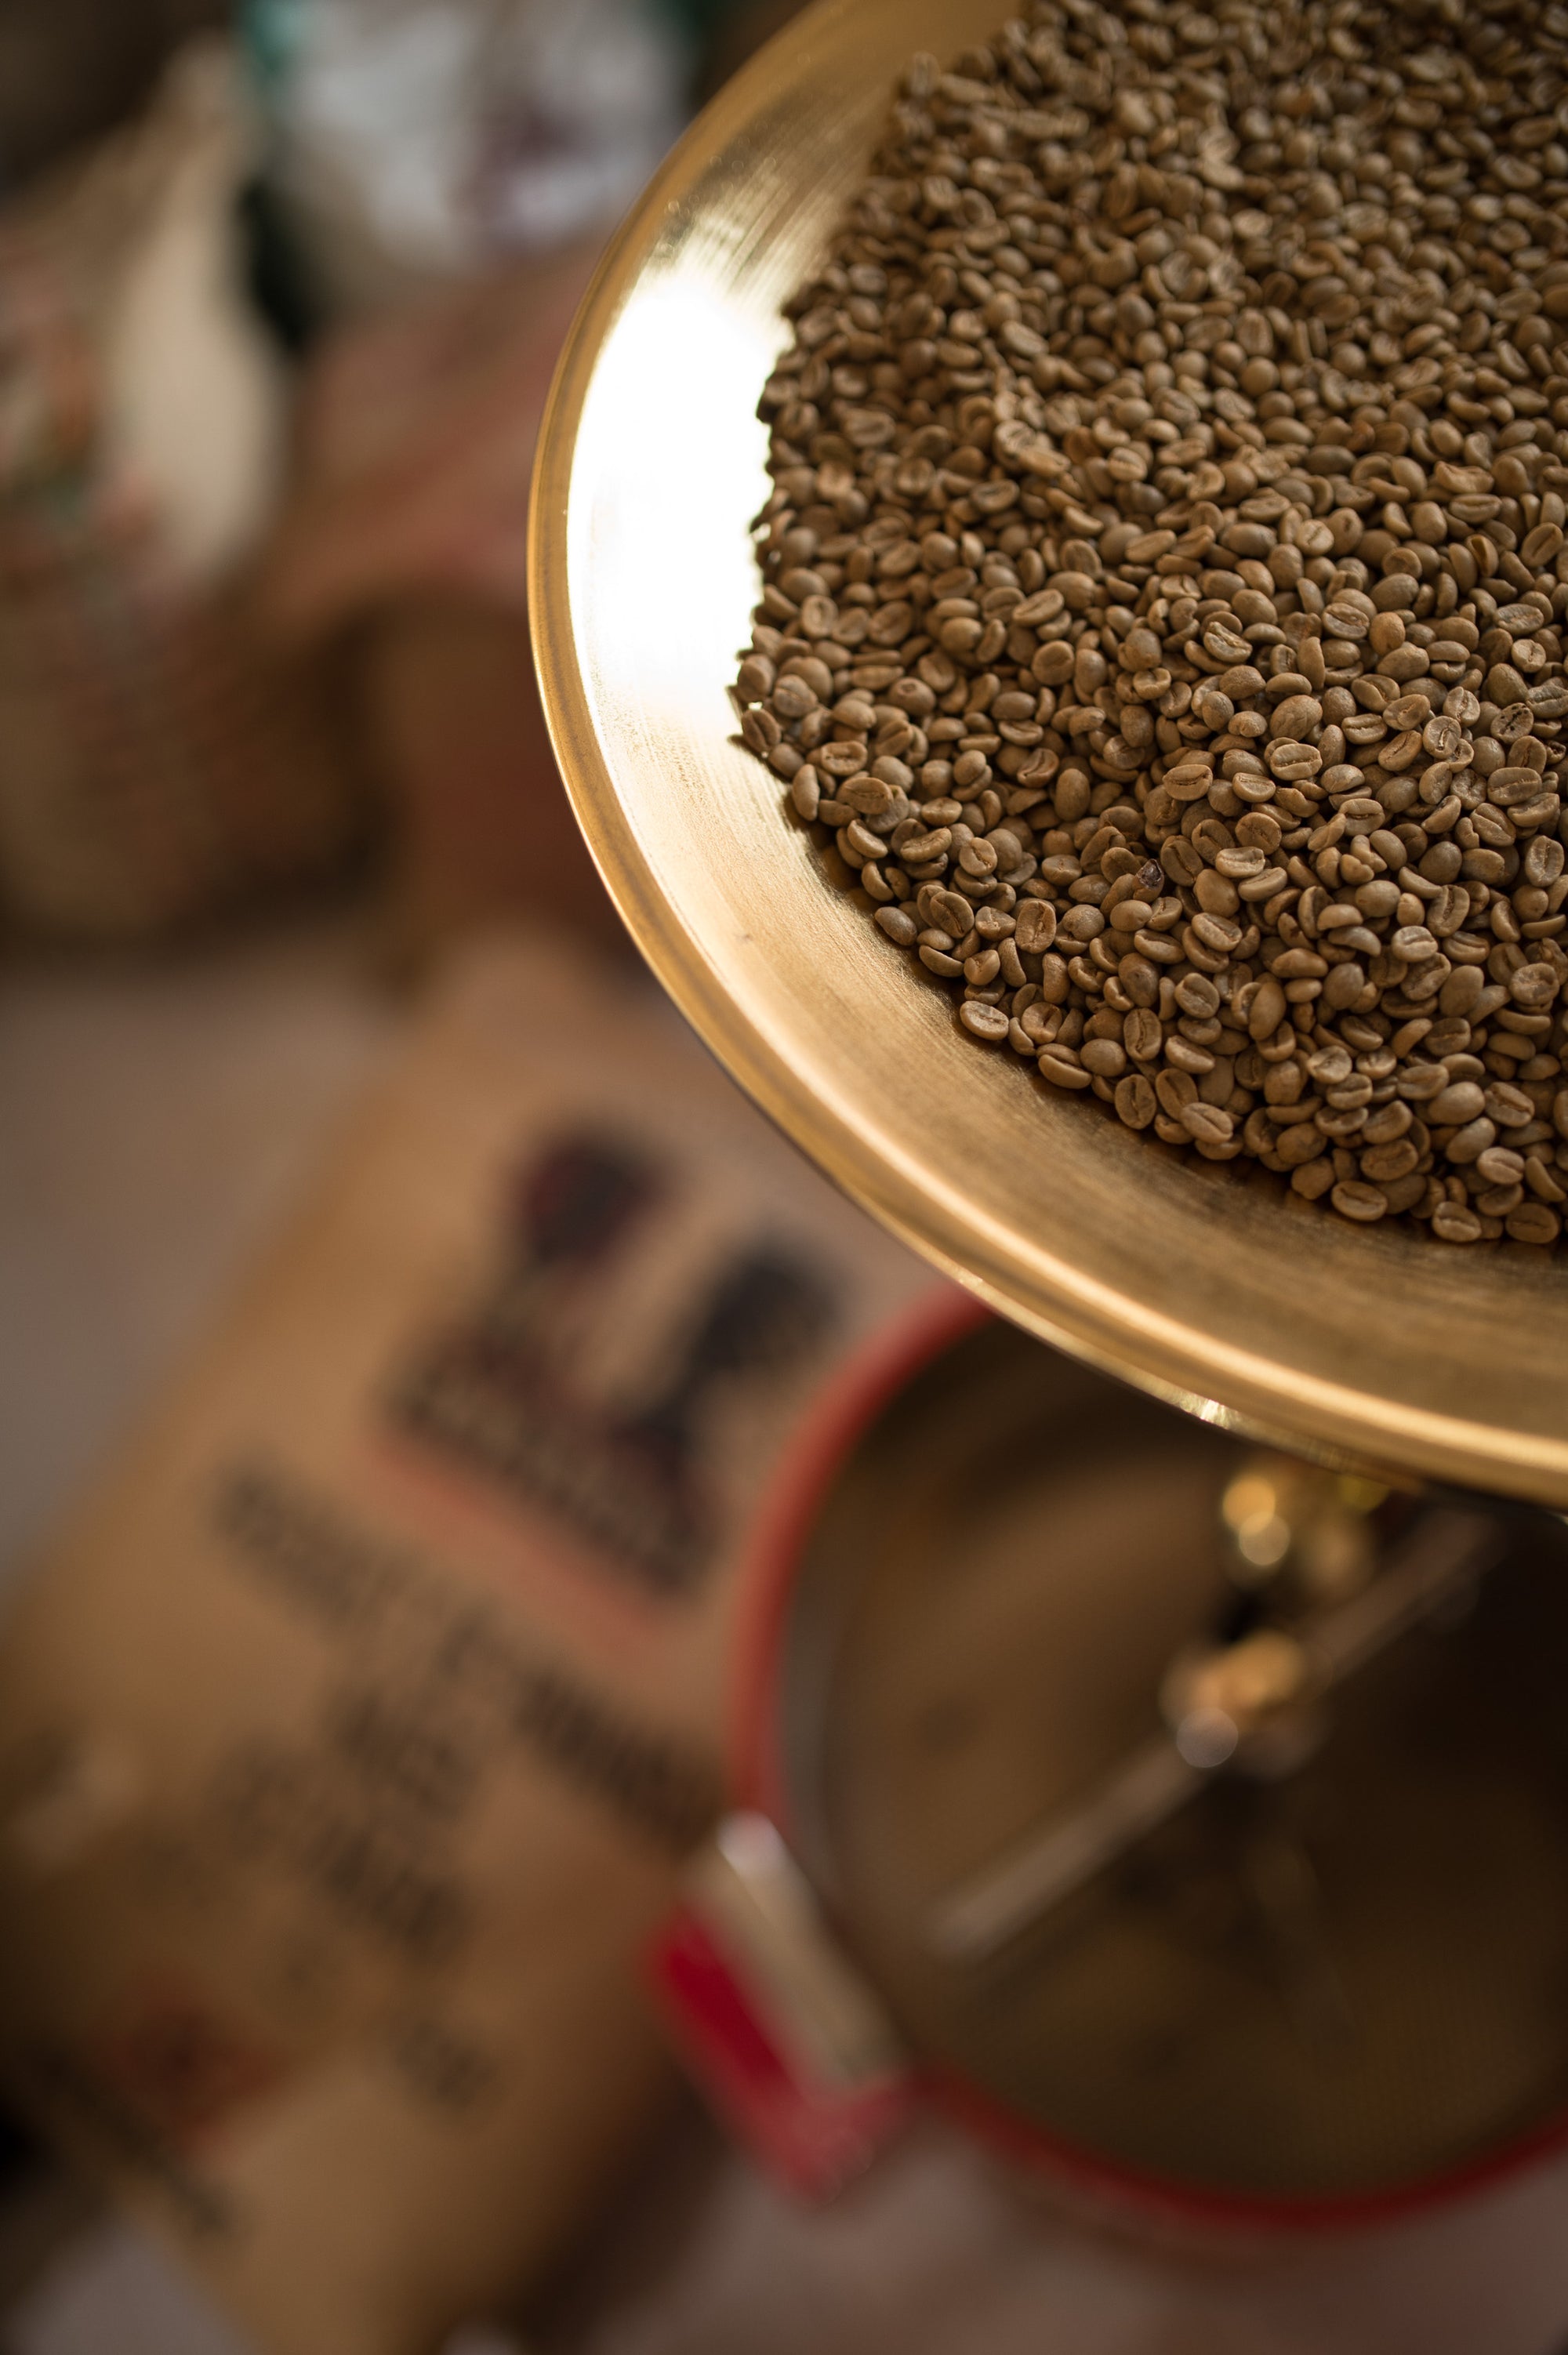 Some Facts About Specialty Coffee